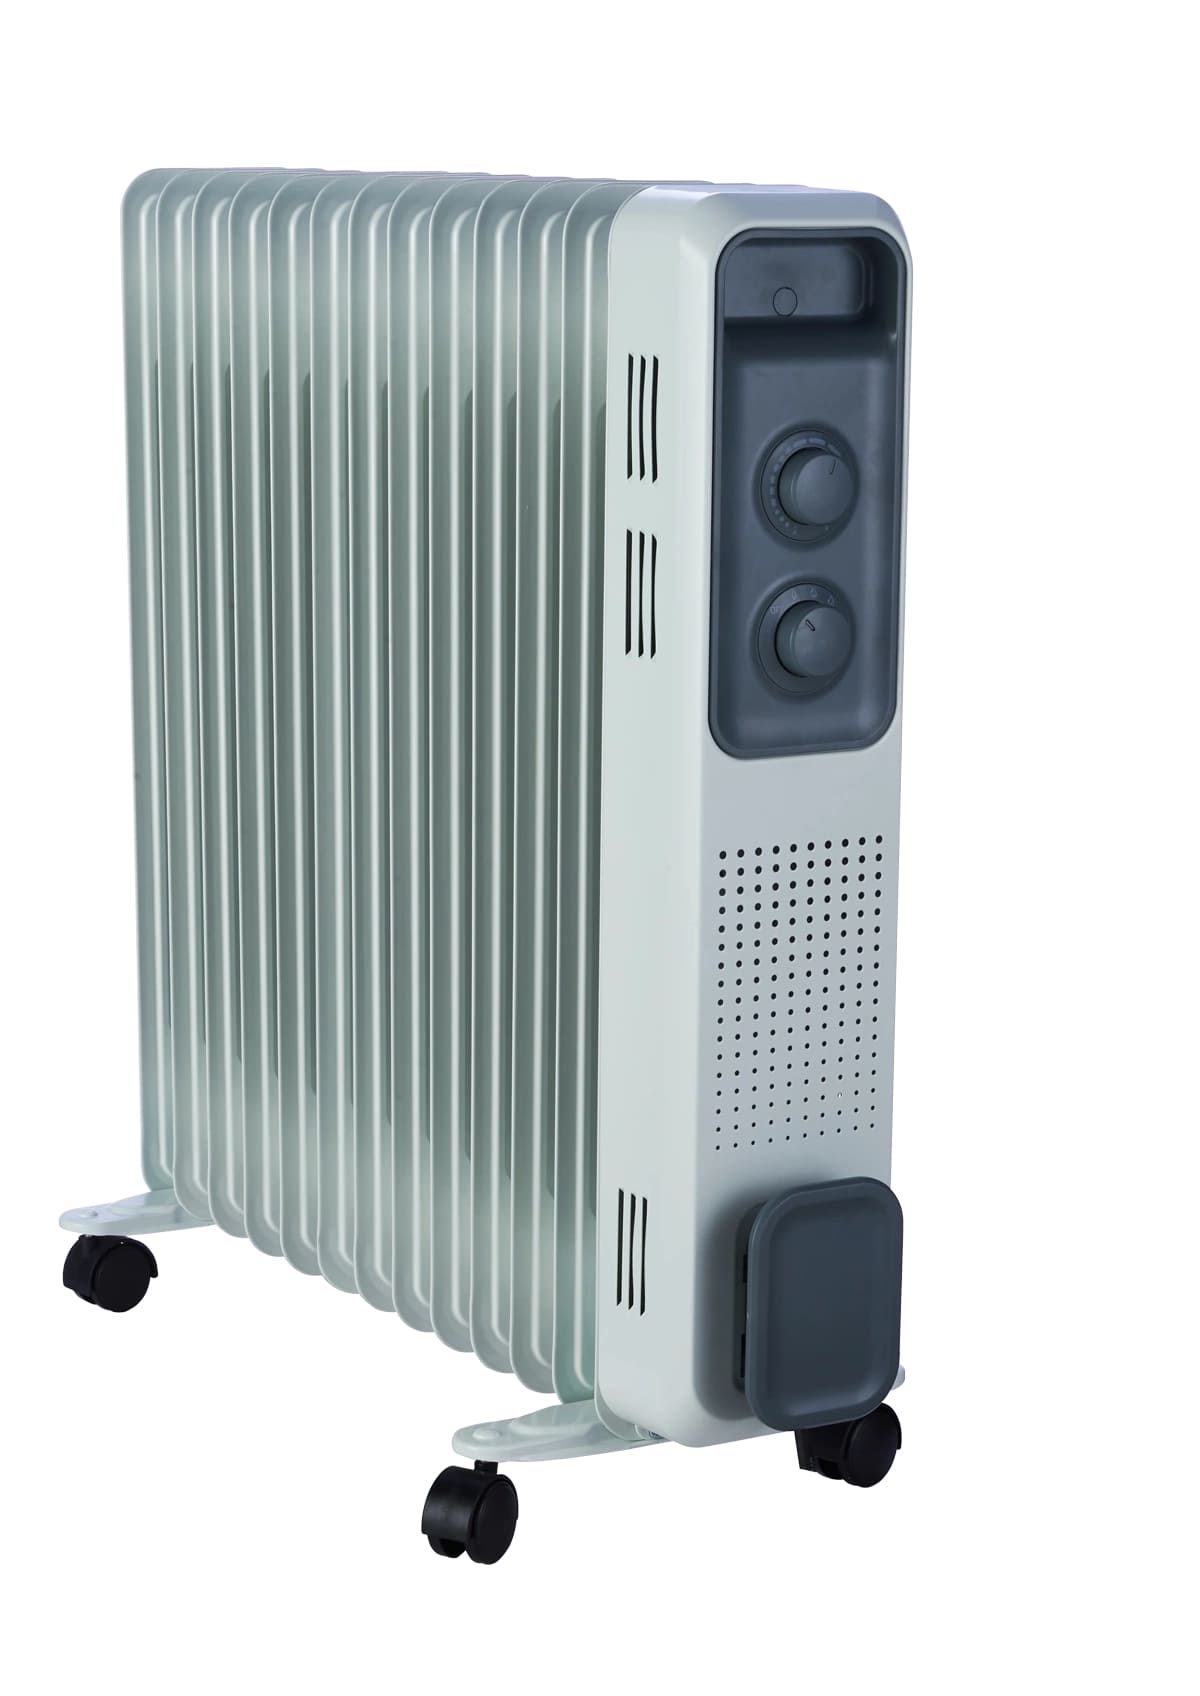 Electromatic Oil Filled Radiator 13 Fins 2500 W With clothes rack Full safety system